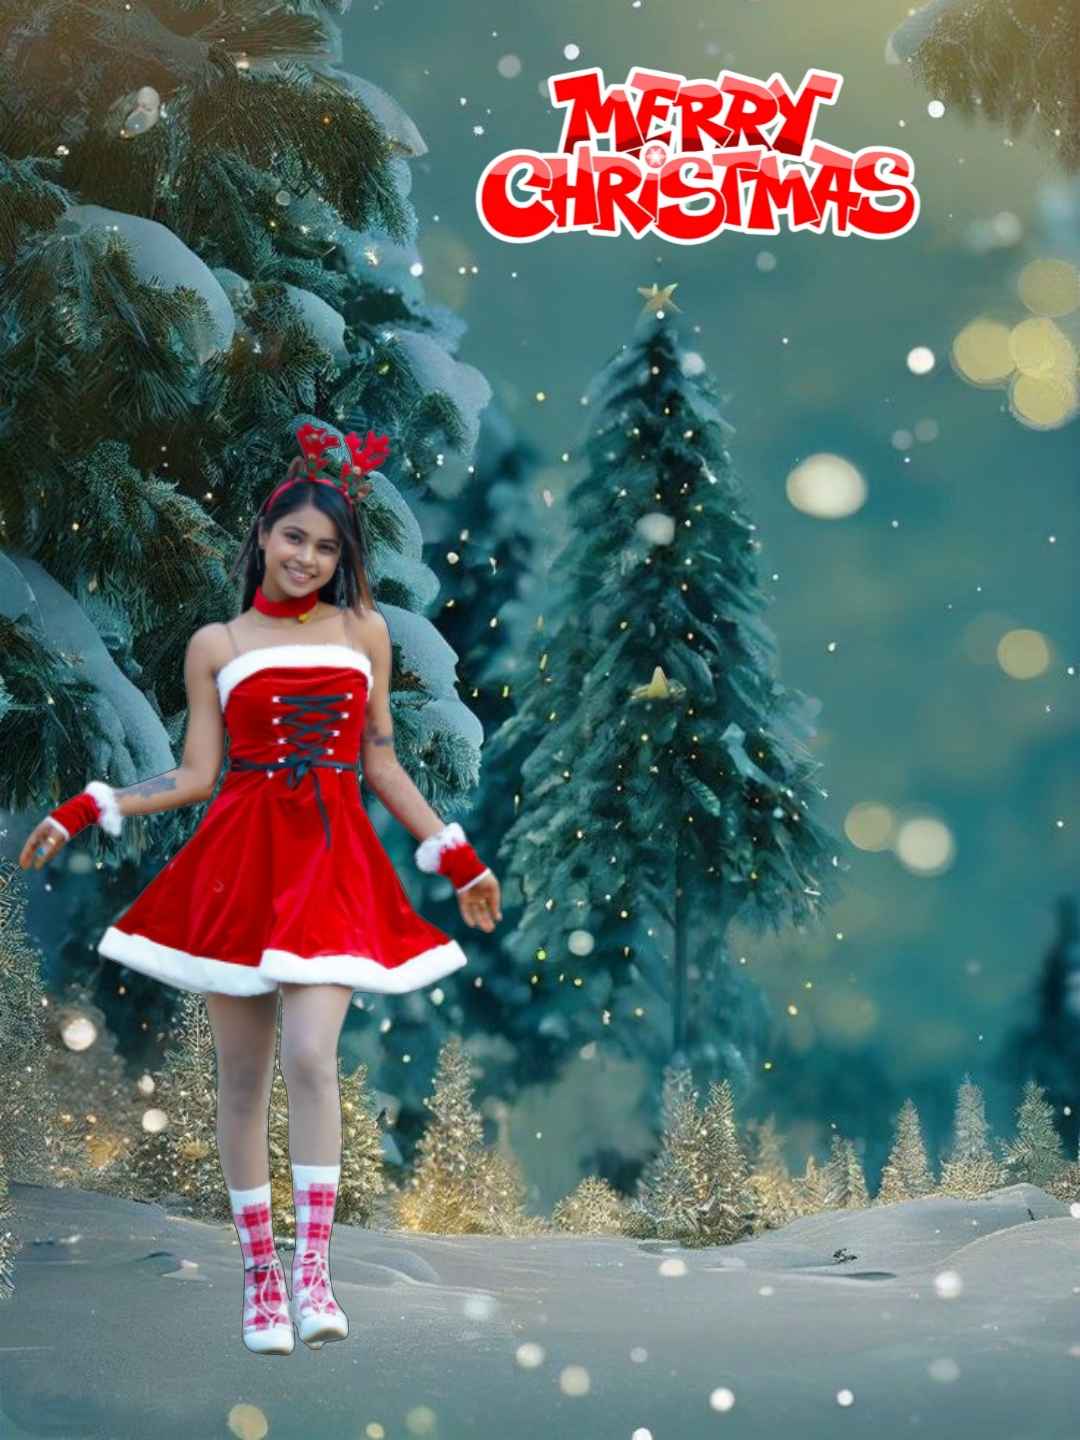 Christmas CB Photo Editing New Background With Girl